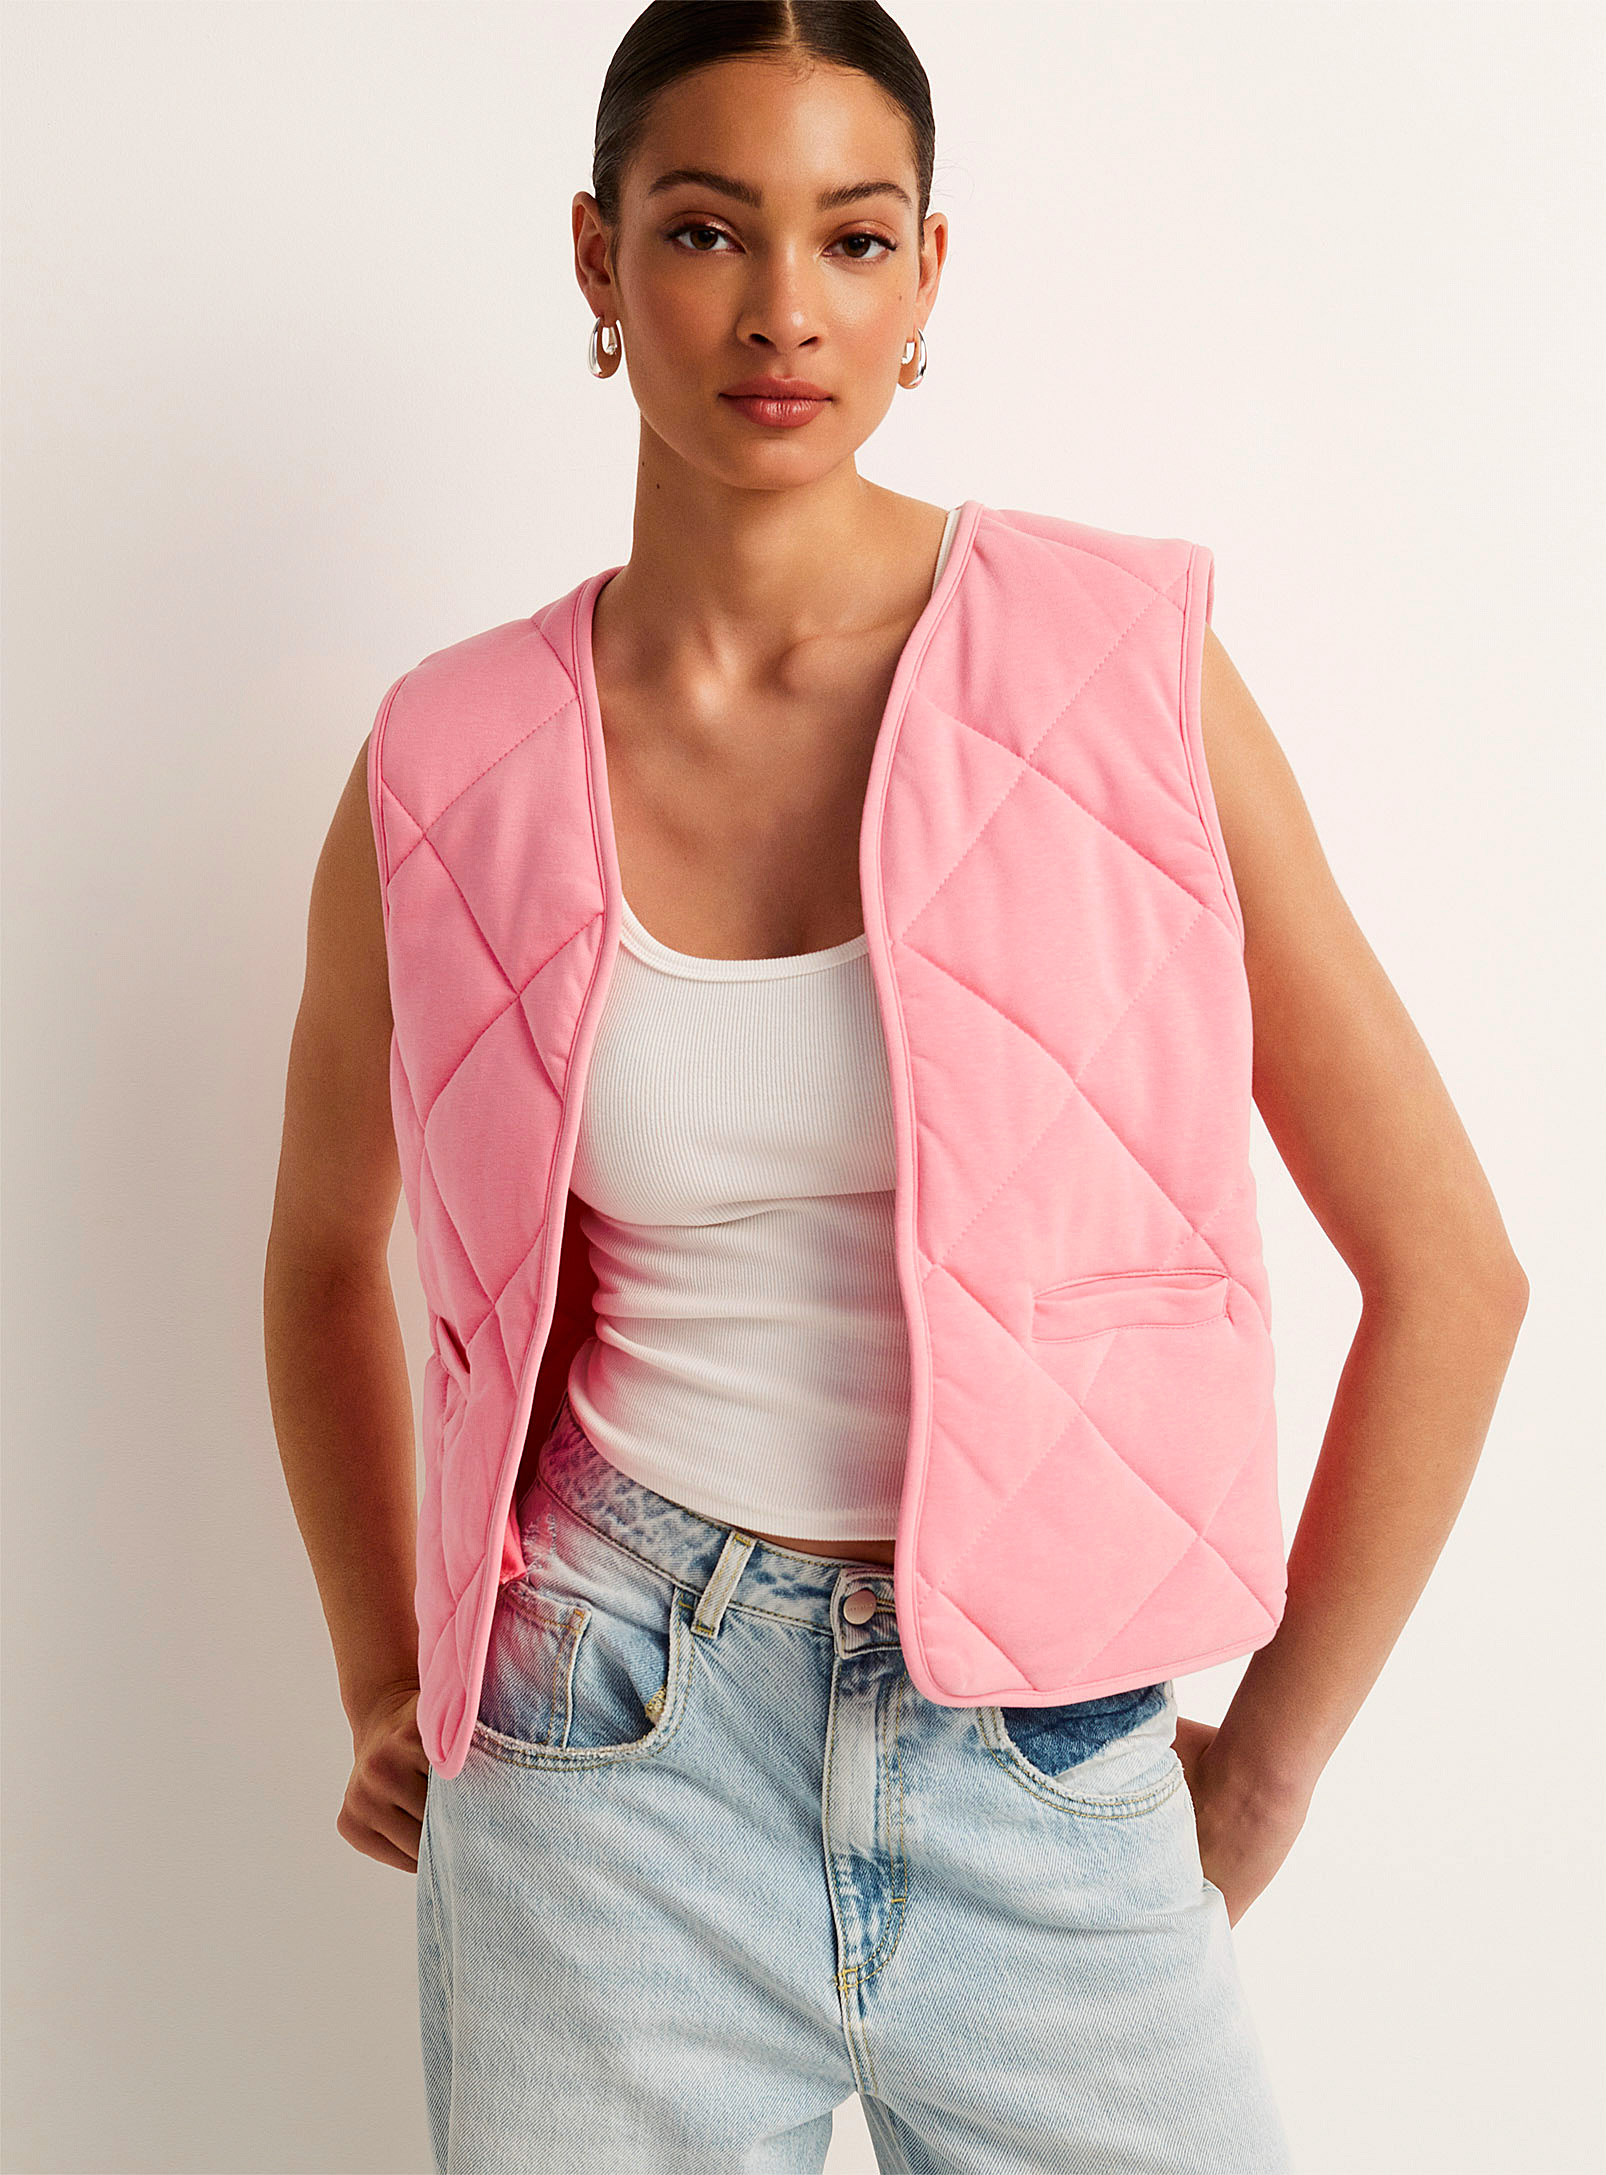 ICHI - Women's Muted pink sleeveless quilted jacket